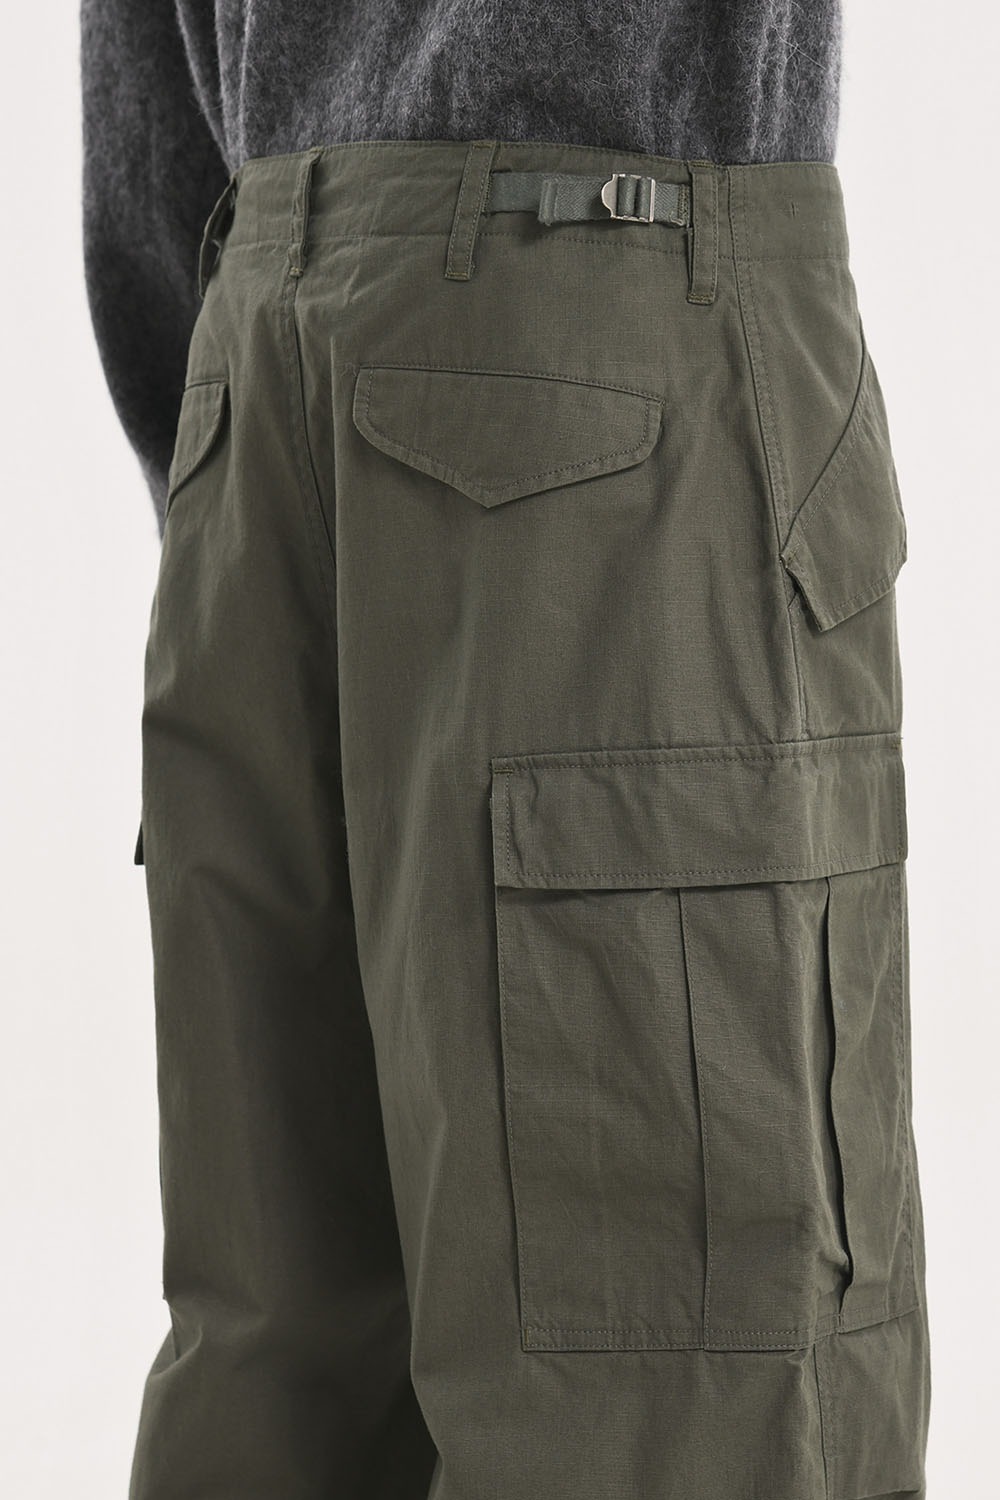 Military Field Pants-Olive